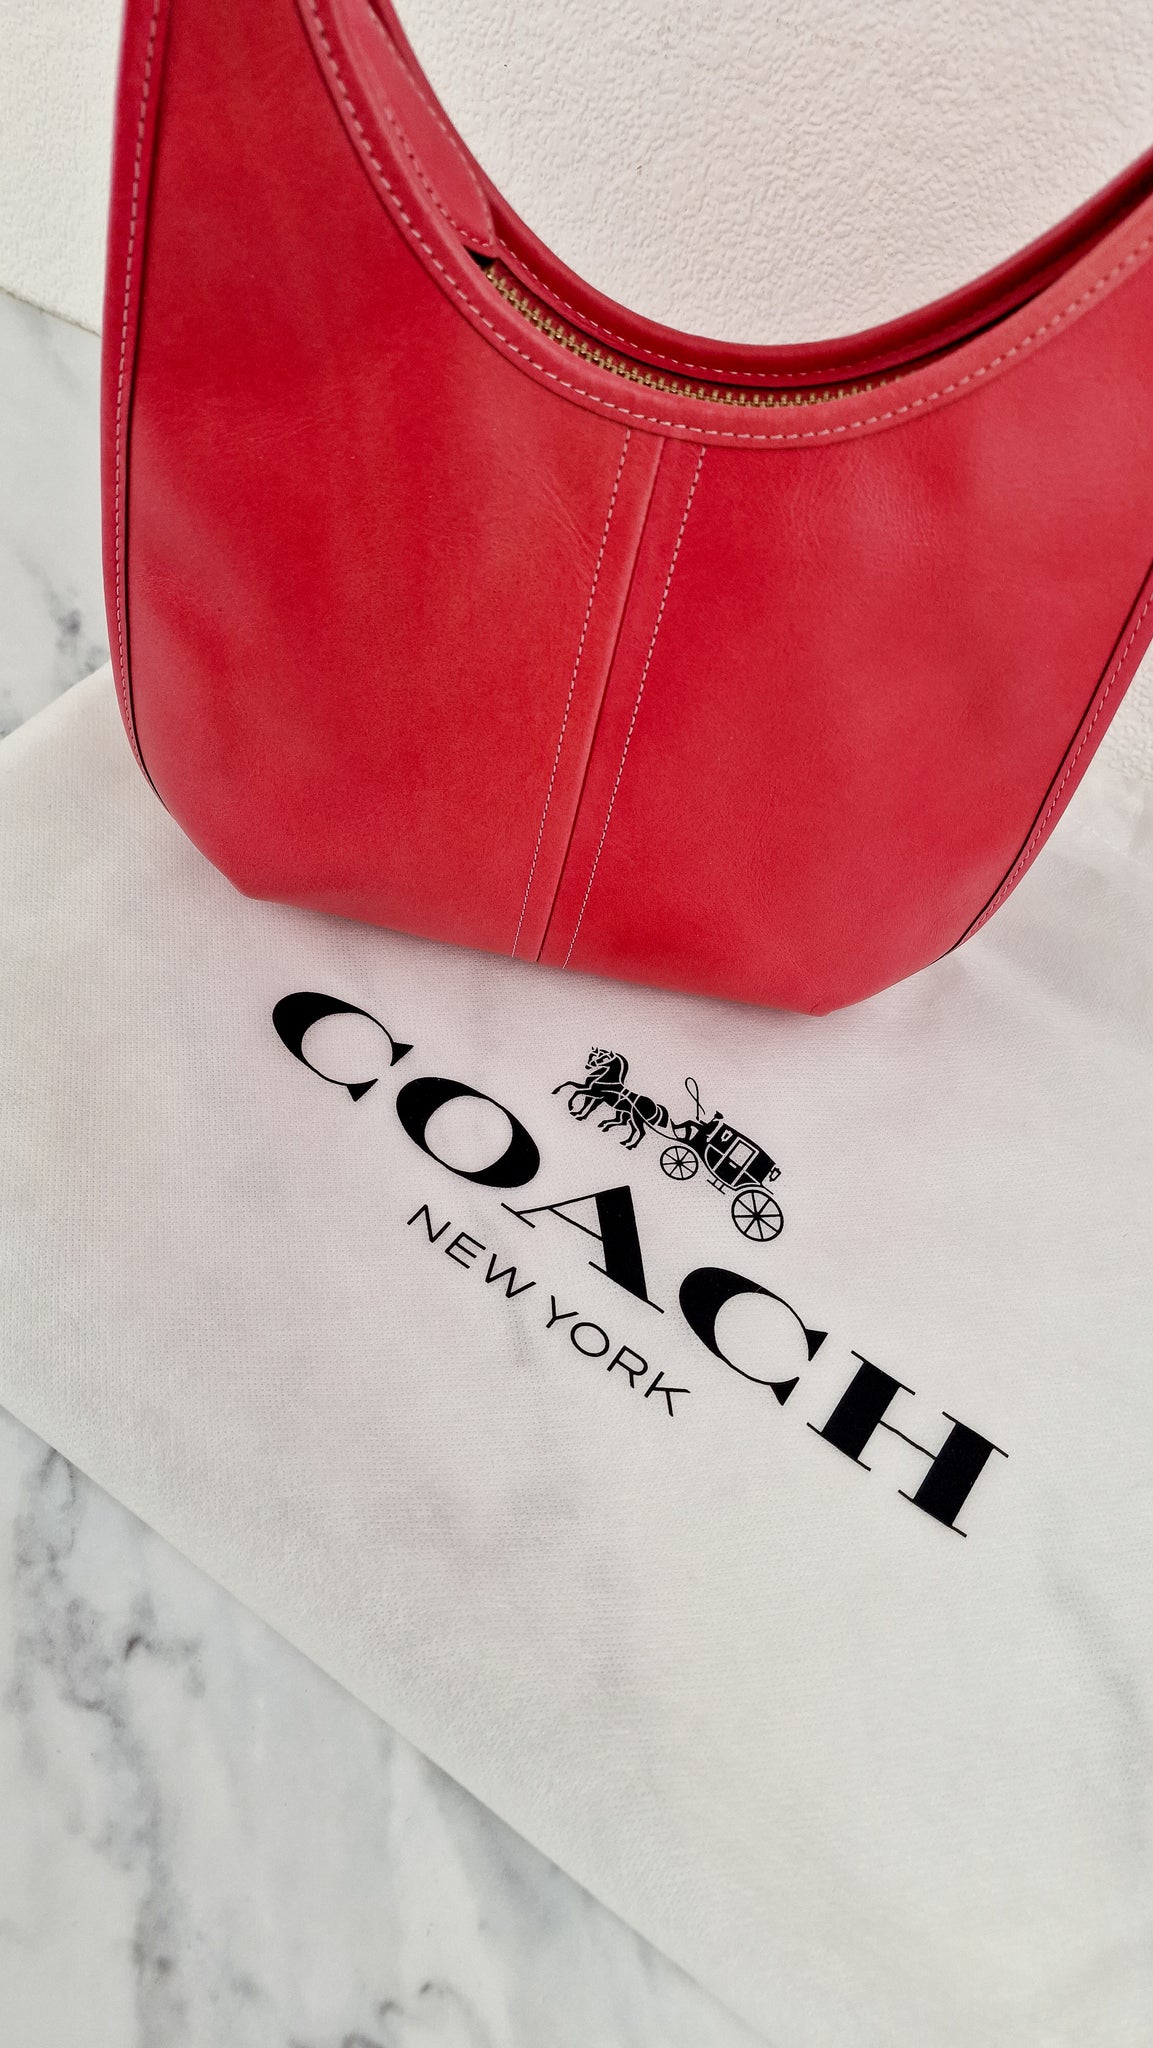 Coach purse: Save now on handbags, satchels and crossbodies - Reviewed